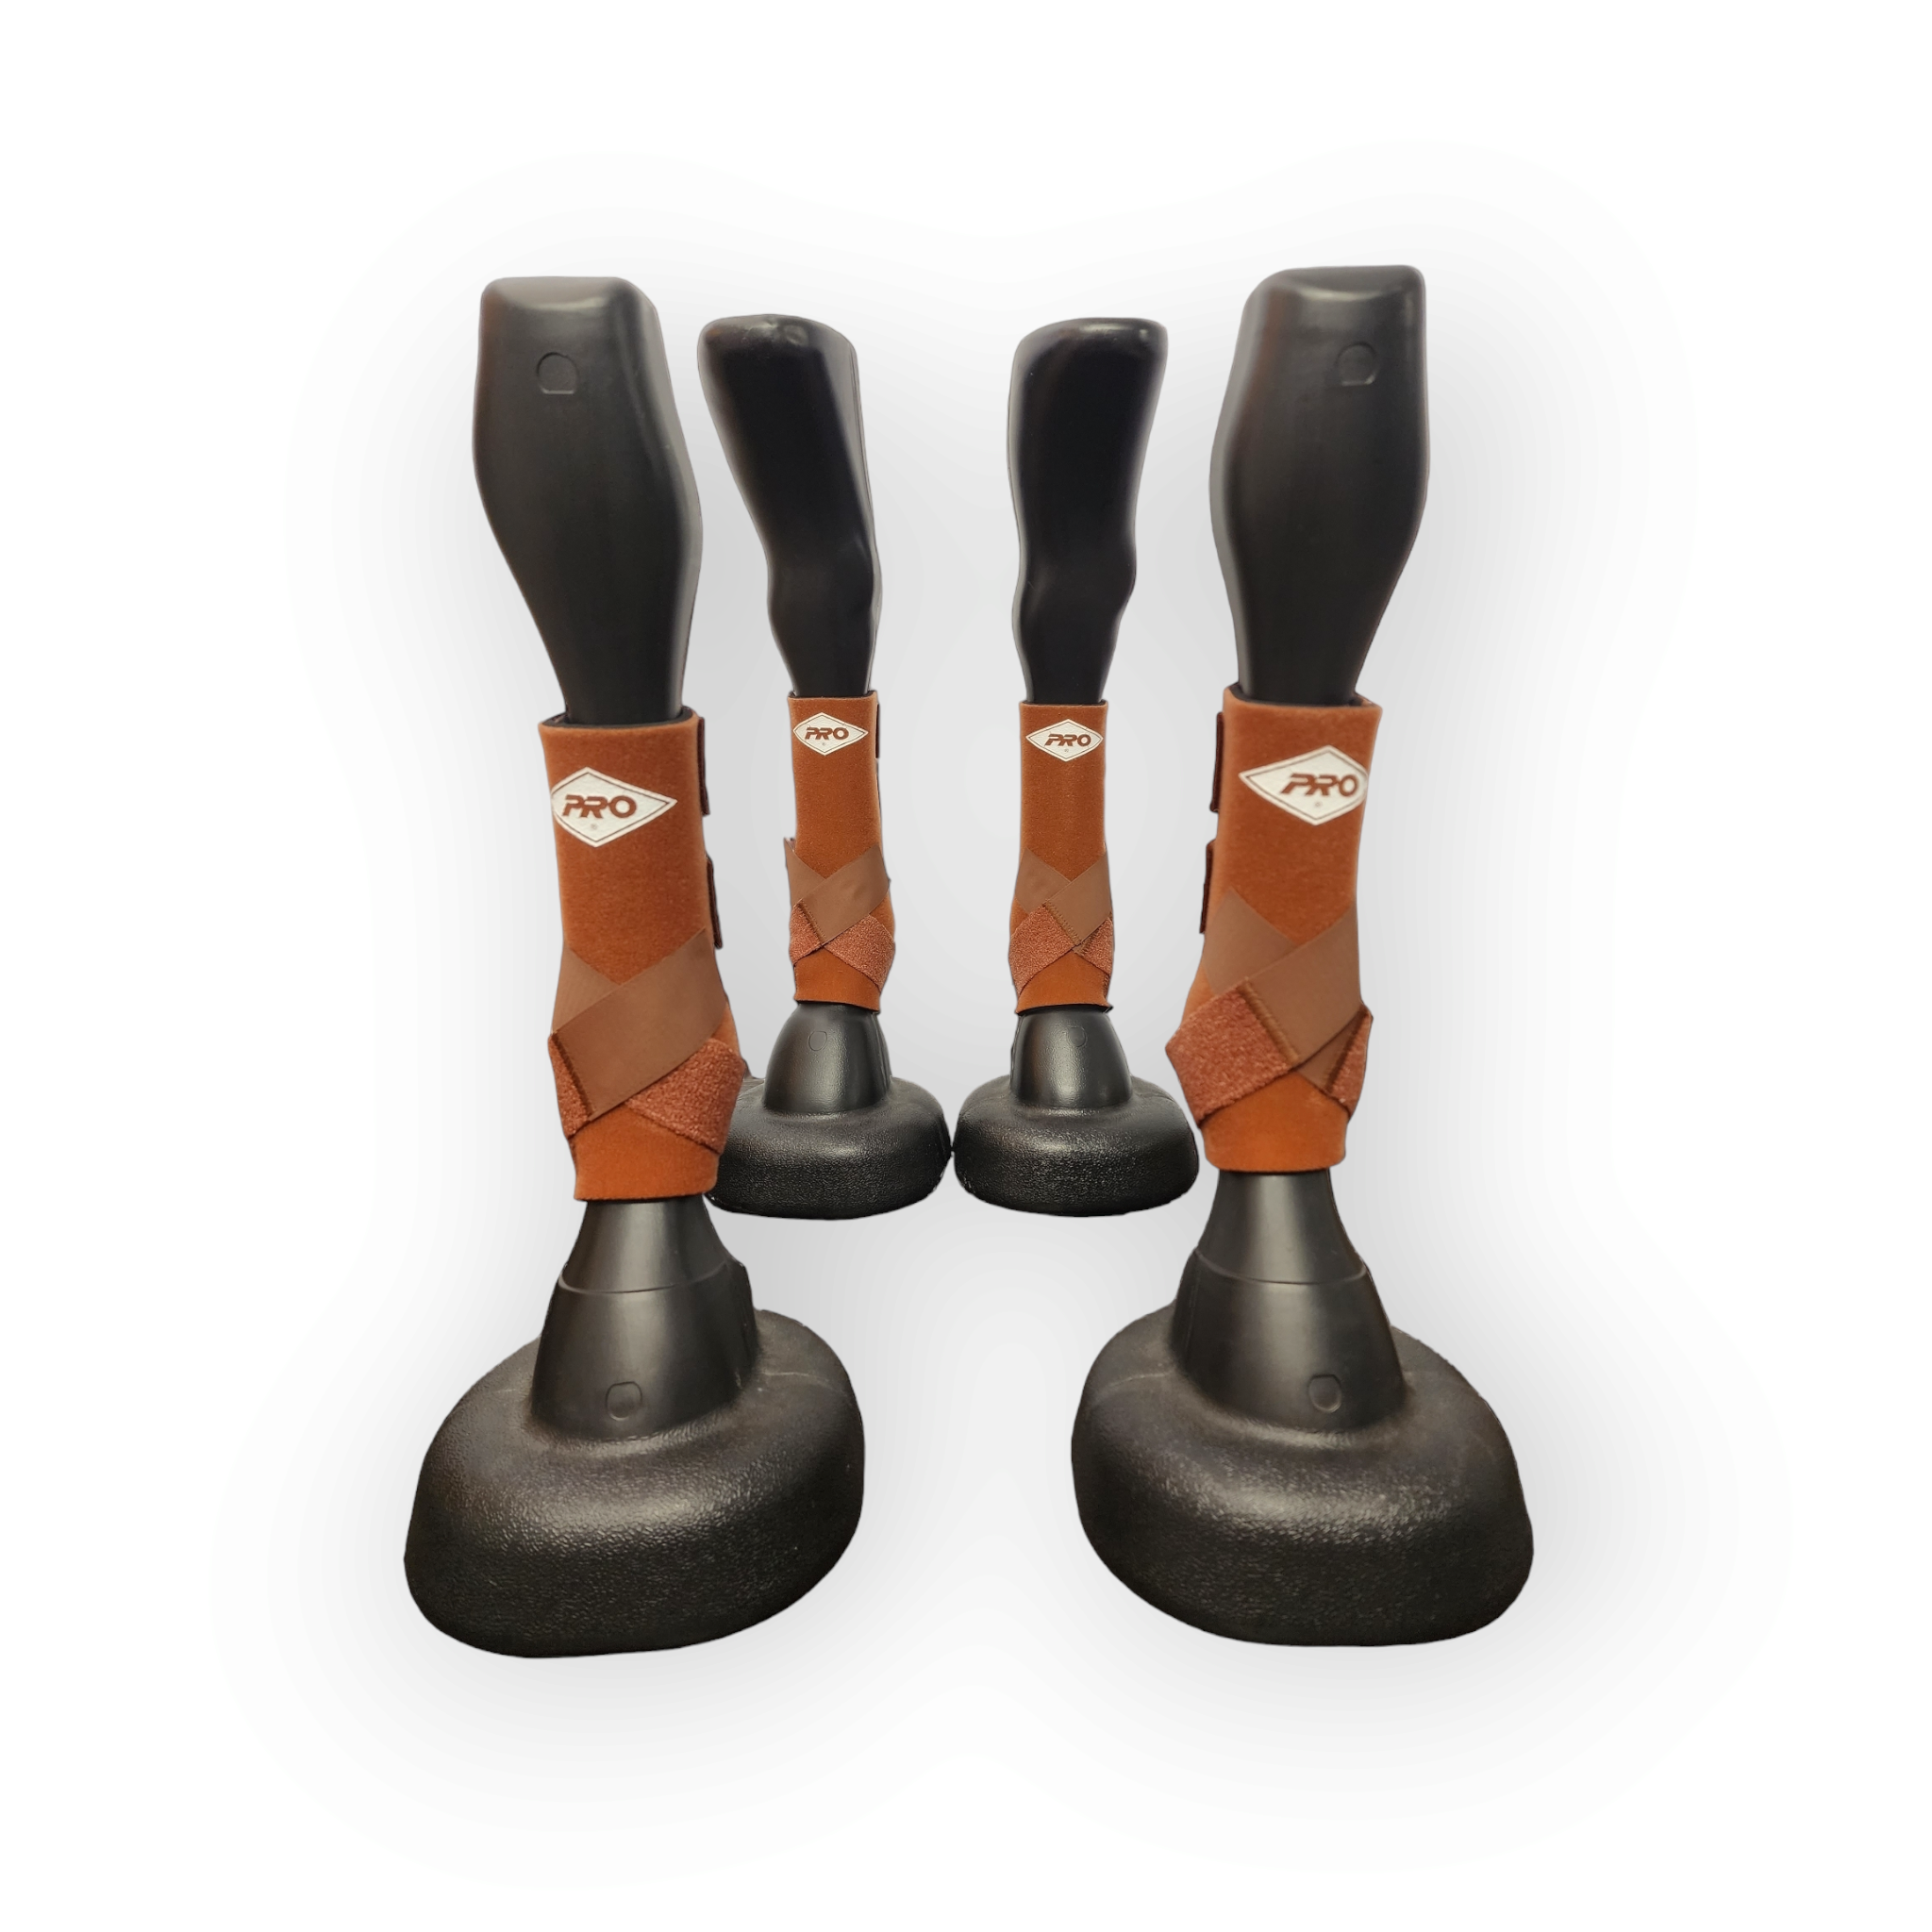 Chestnut Pro Orthopedic Equine Sports Support Boots set of 4 - IN STOCK